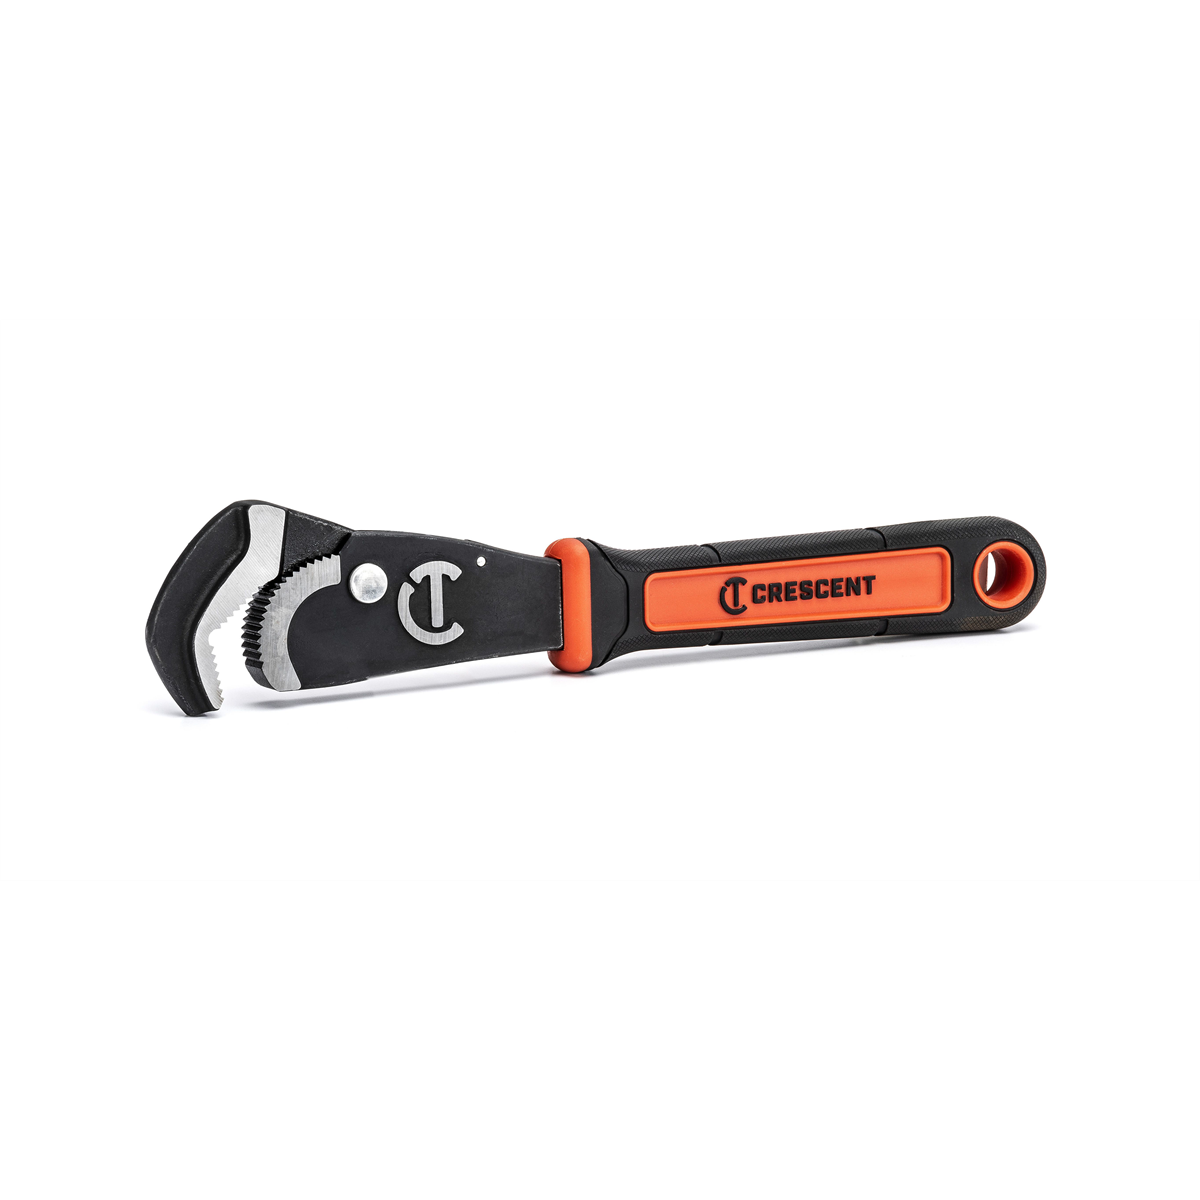 CRESCENT 12" SELF ADJUSTING PIPE WRENCH